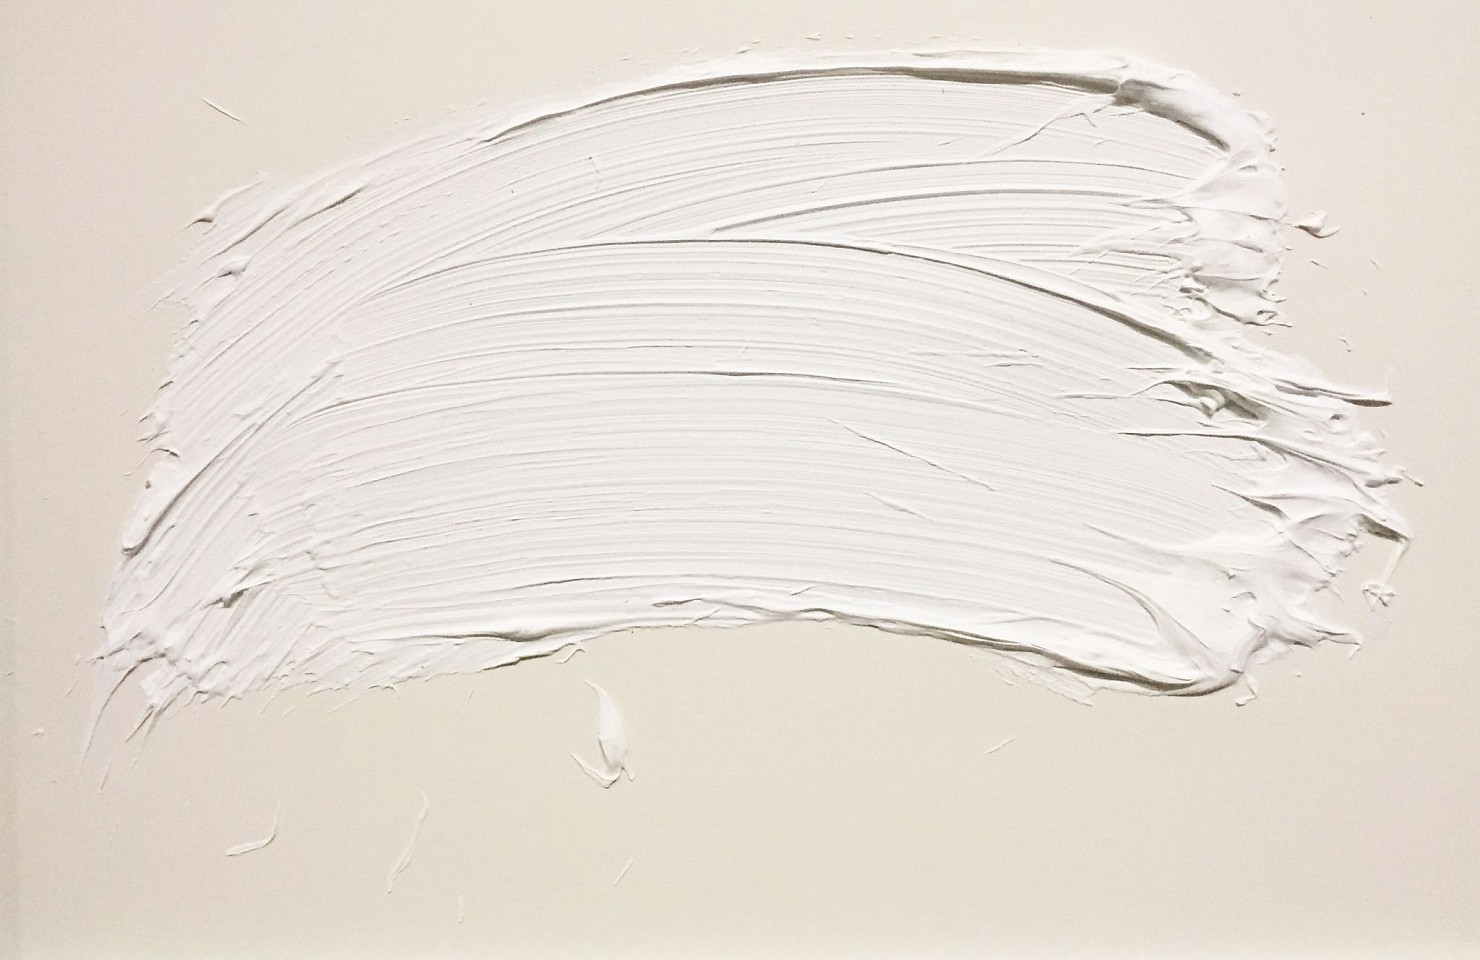 Donald Martiny, Untitled, 2017
polymer and pigment on paper, 22.75 x 30.5 in.
White
MART0042